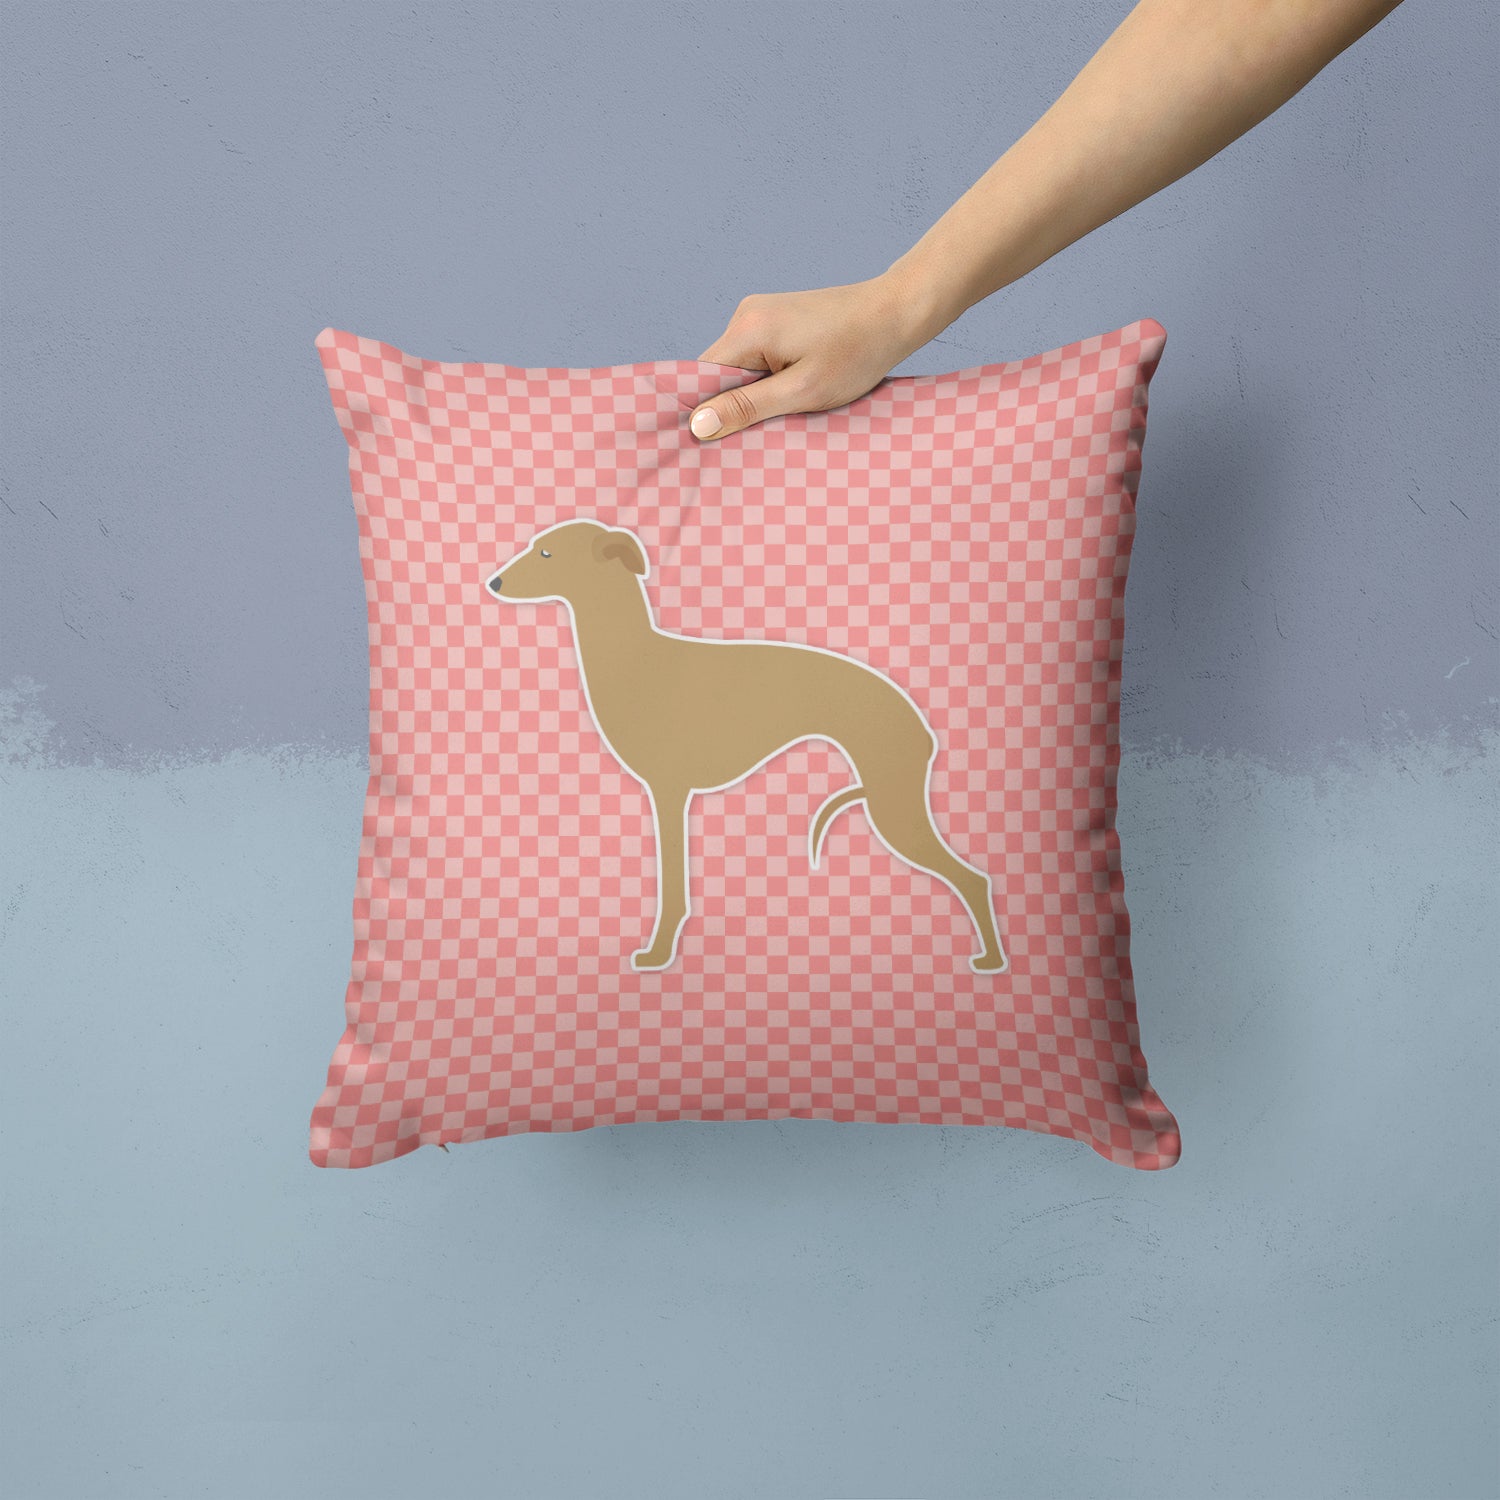 Italian Greyhound Checkerboard Pink Fabric Decorative Pillow BB3614PW1414 - the-store.com